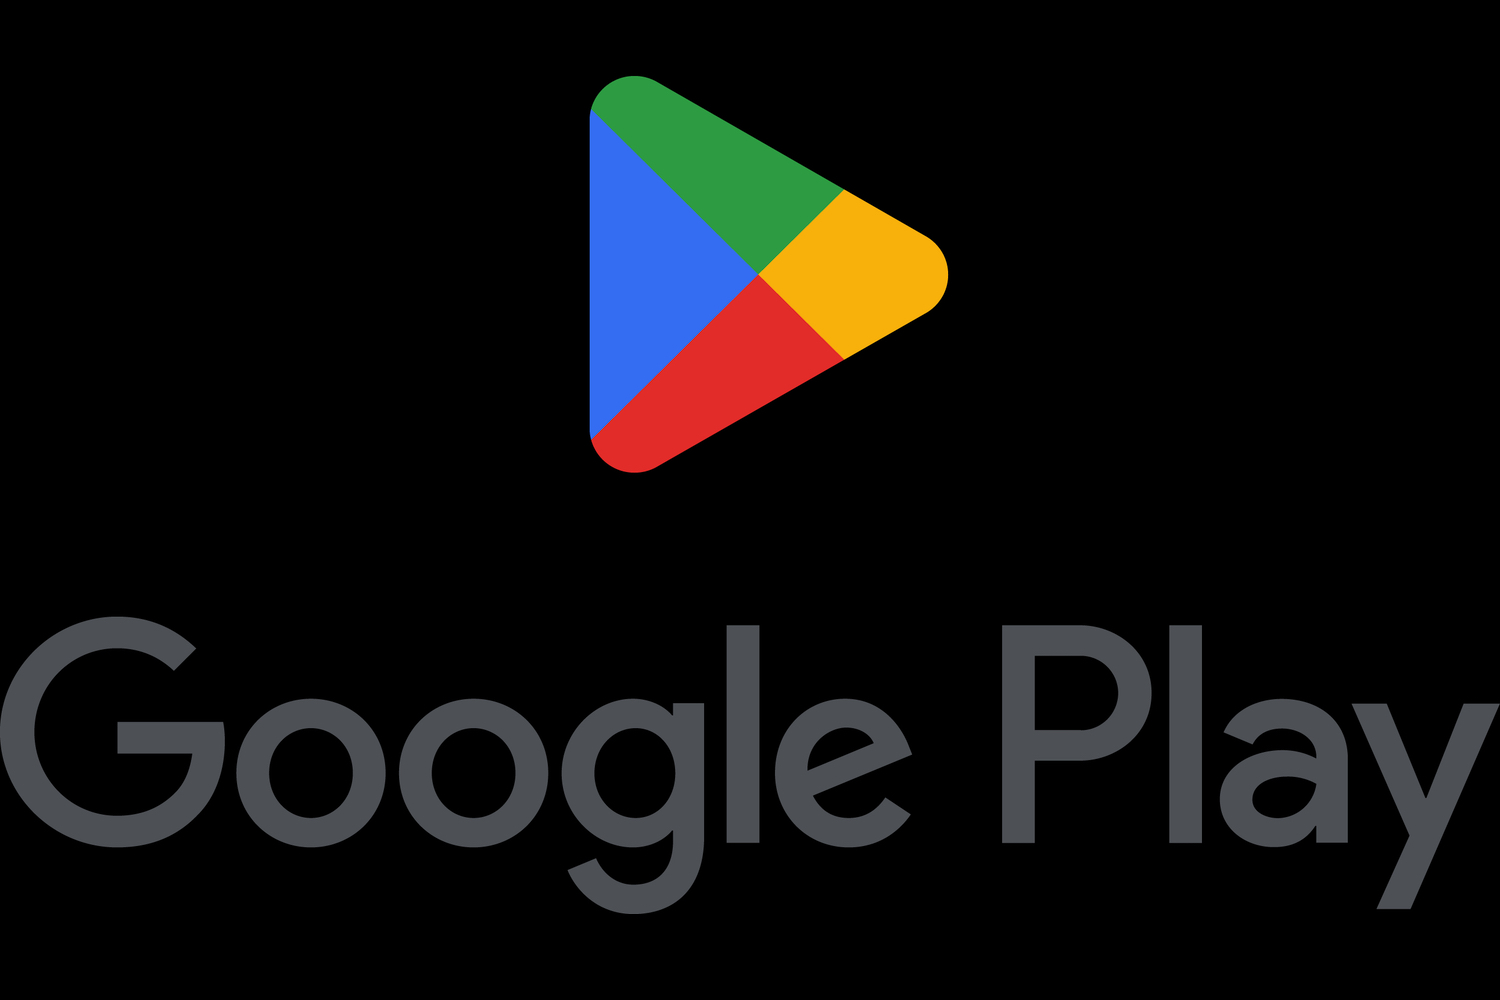 Play 'spot the difference' with Google's new Play Store logo